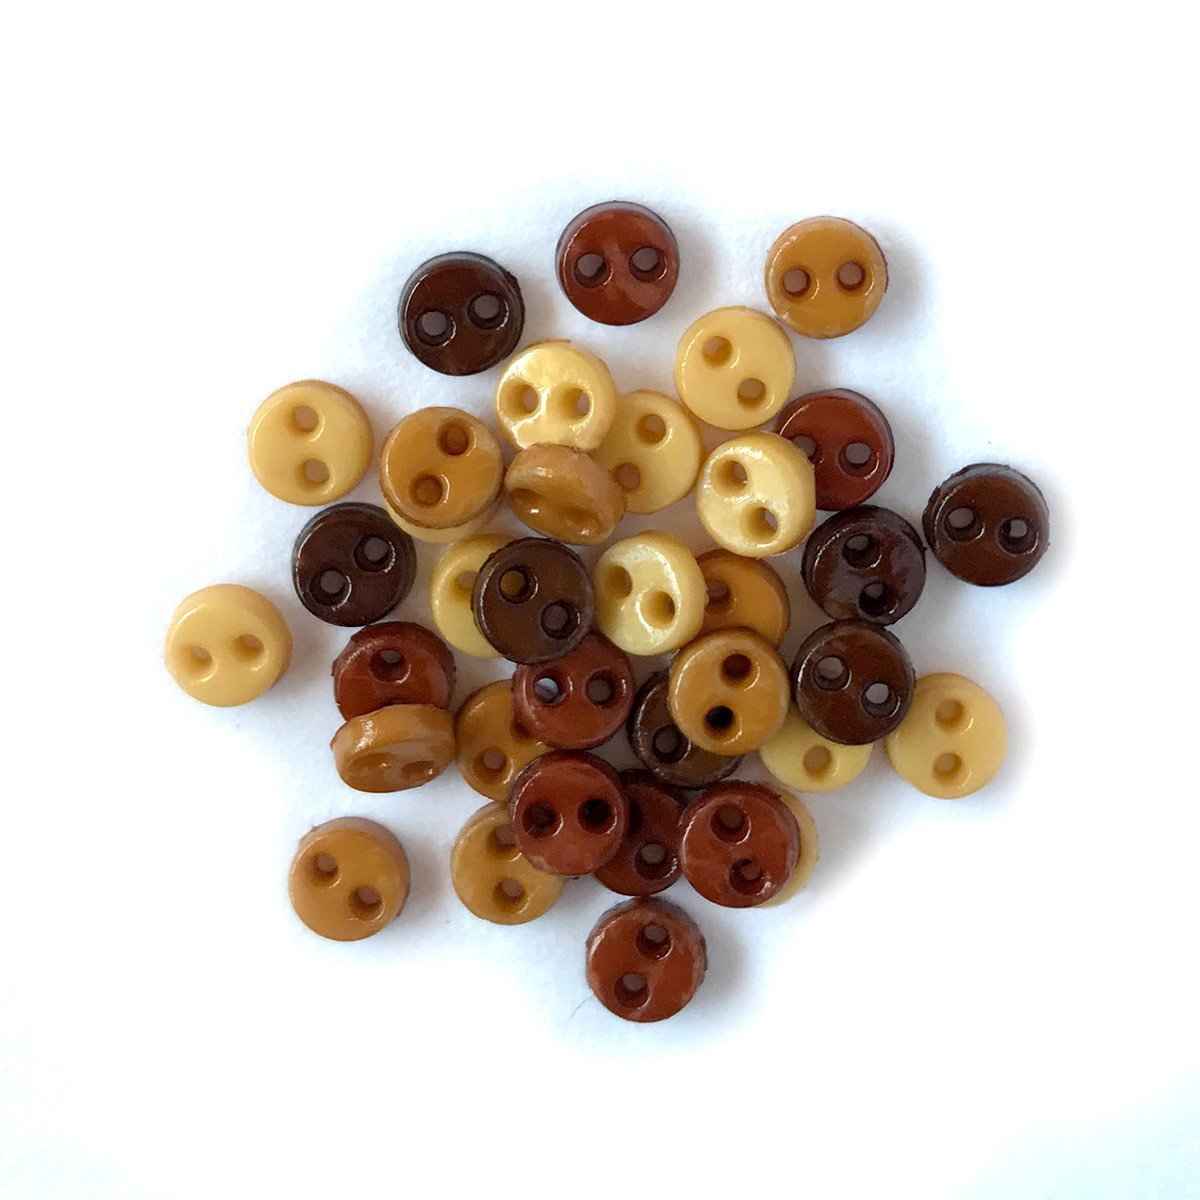 B194 Cute 8mm Paws Shank Buttons Micro Mini Buttons Tiny Buttons